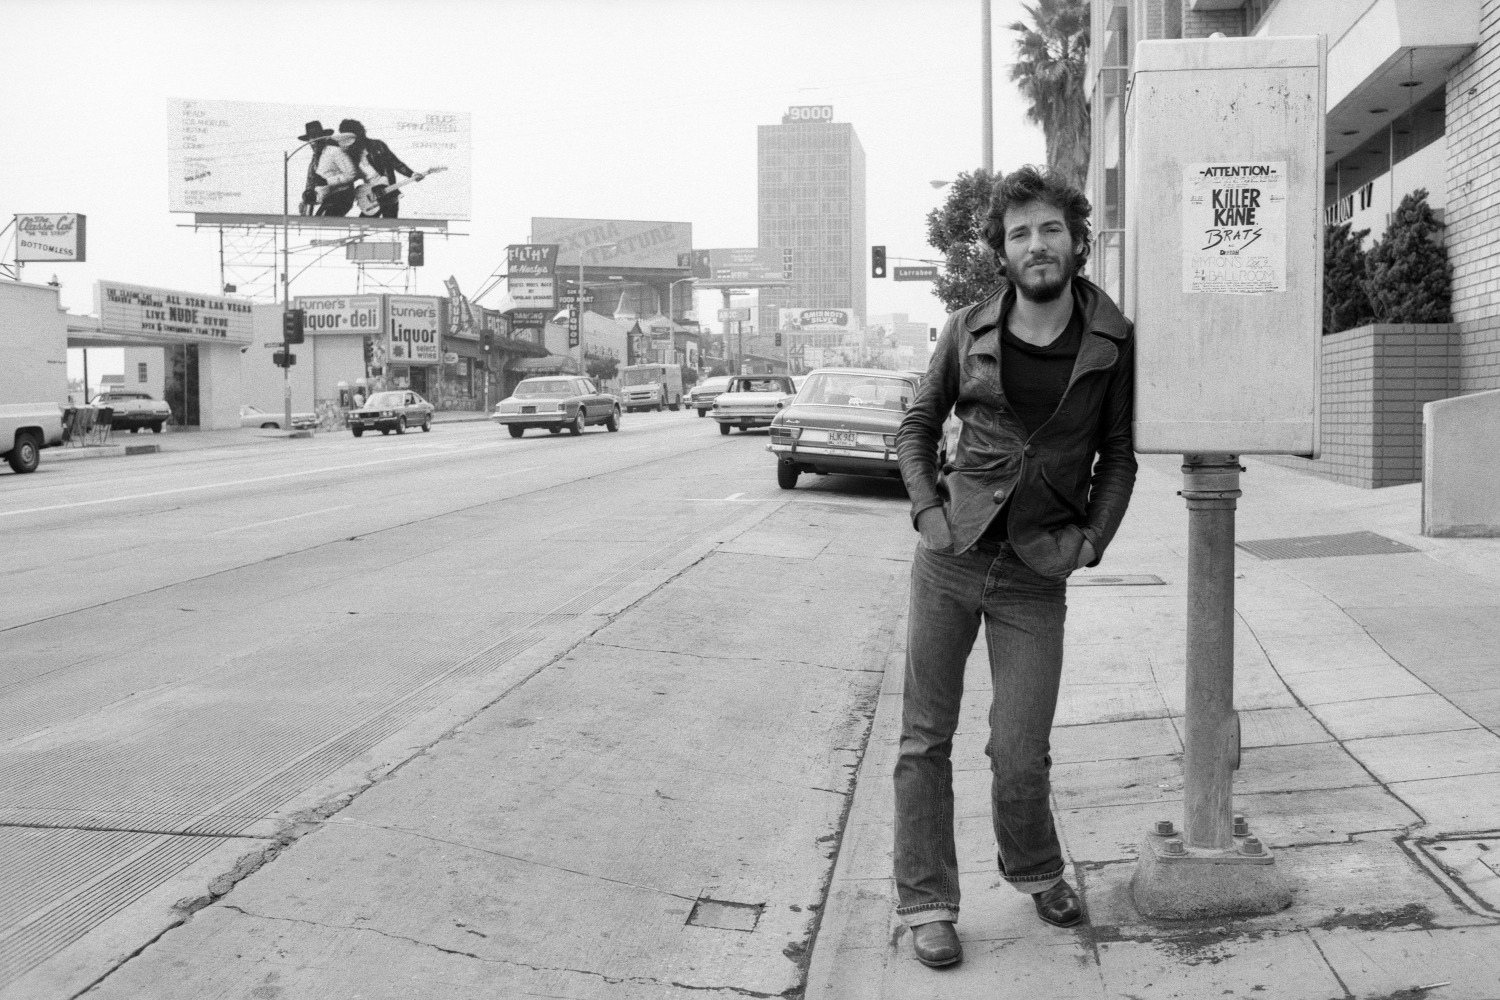 Terry O'Neill, Bruce Springsteen on the Sunset Strip, Los Angeles, 1975